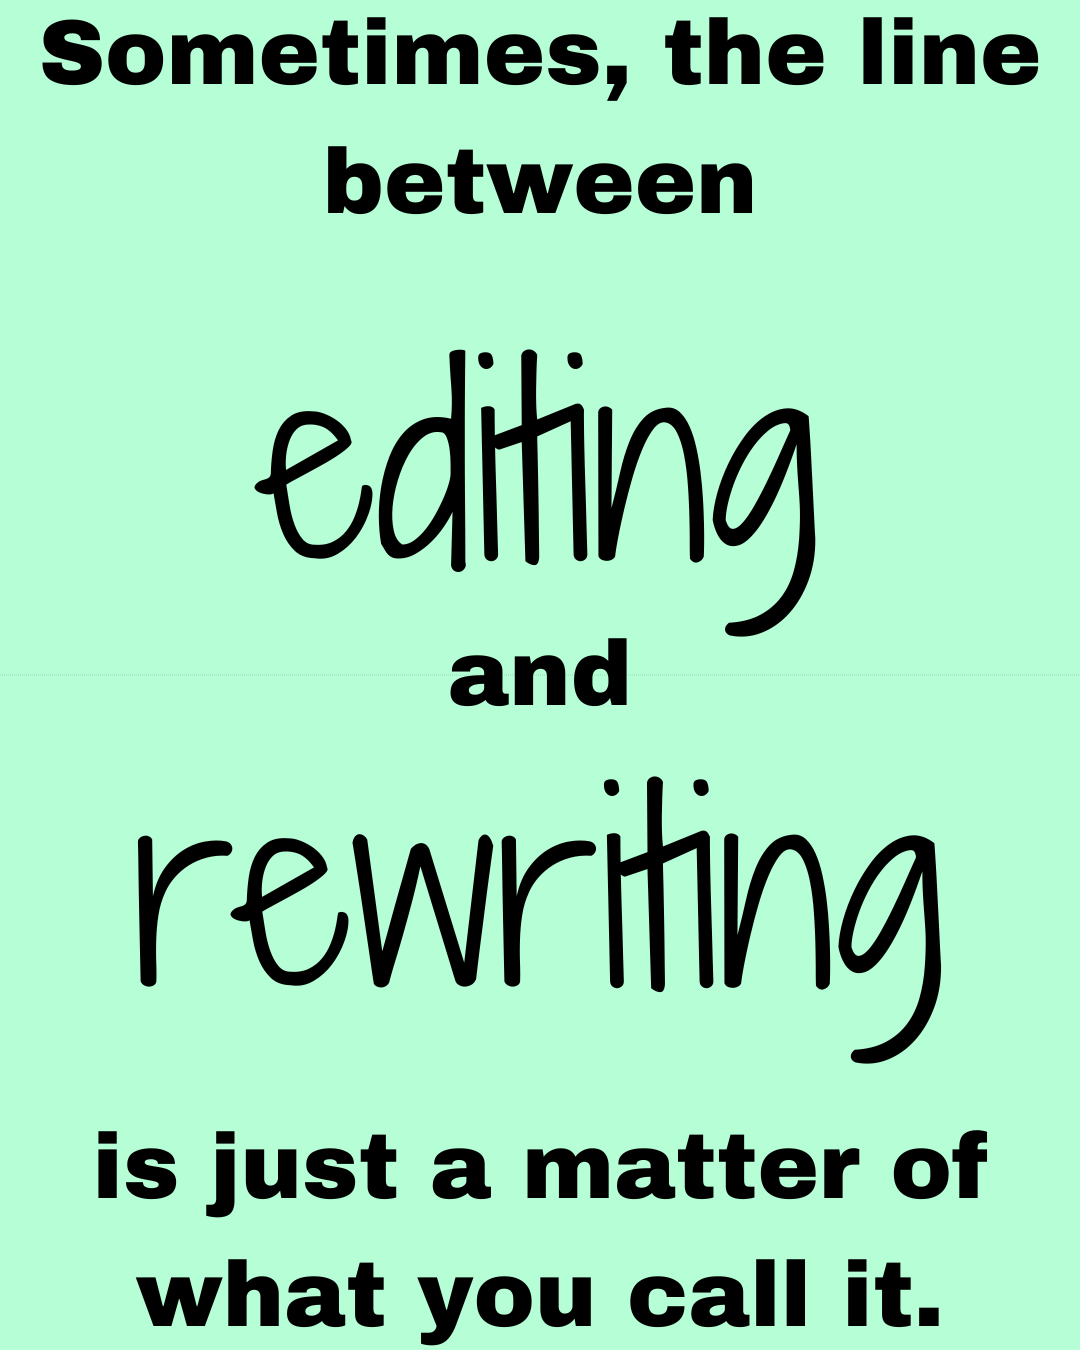 Sometimes, the line between editing and rewriting is just a matter of what you call it.